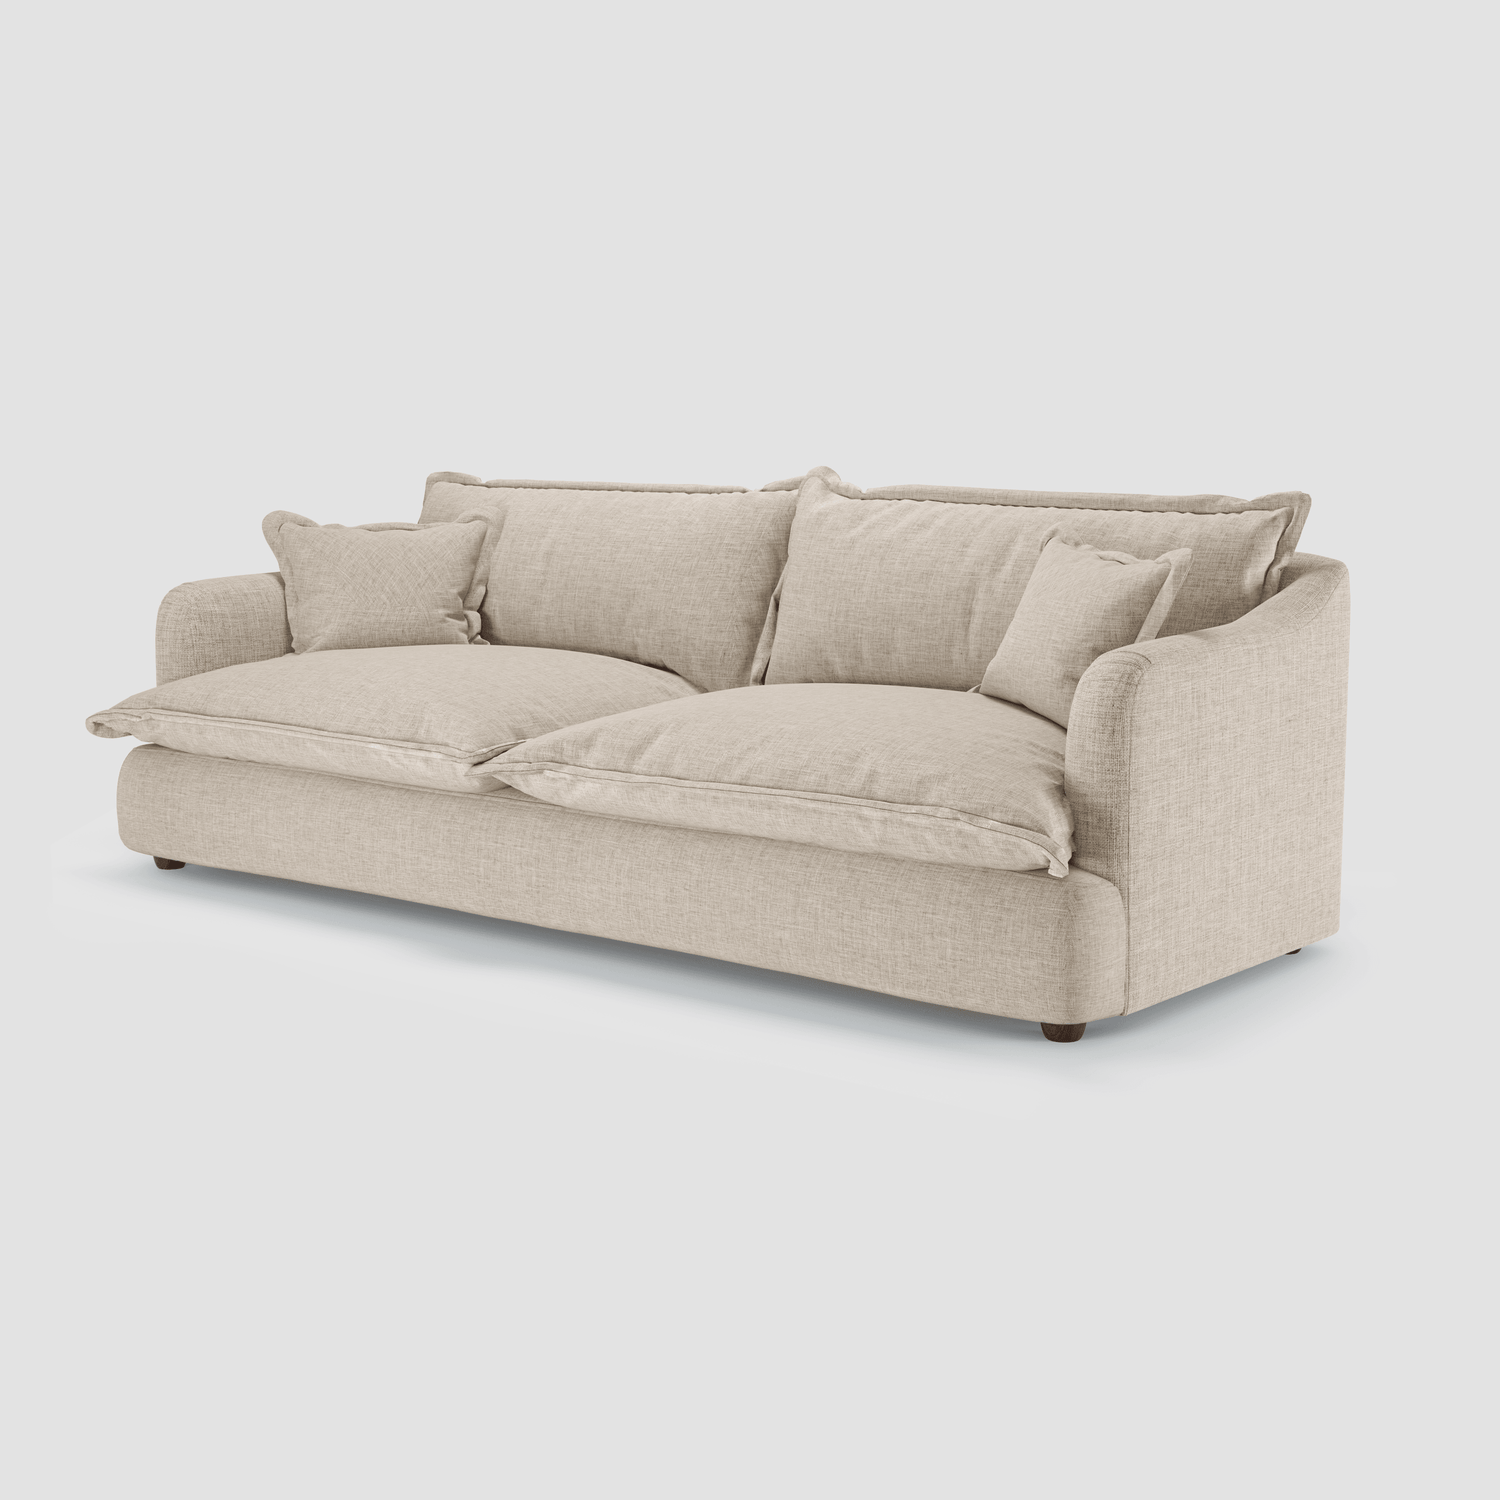 Marlie Four Seater Sofa - Flown the Coop